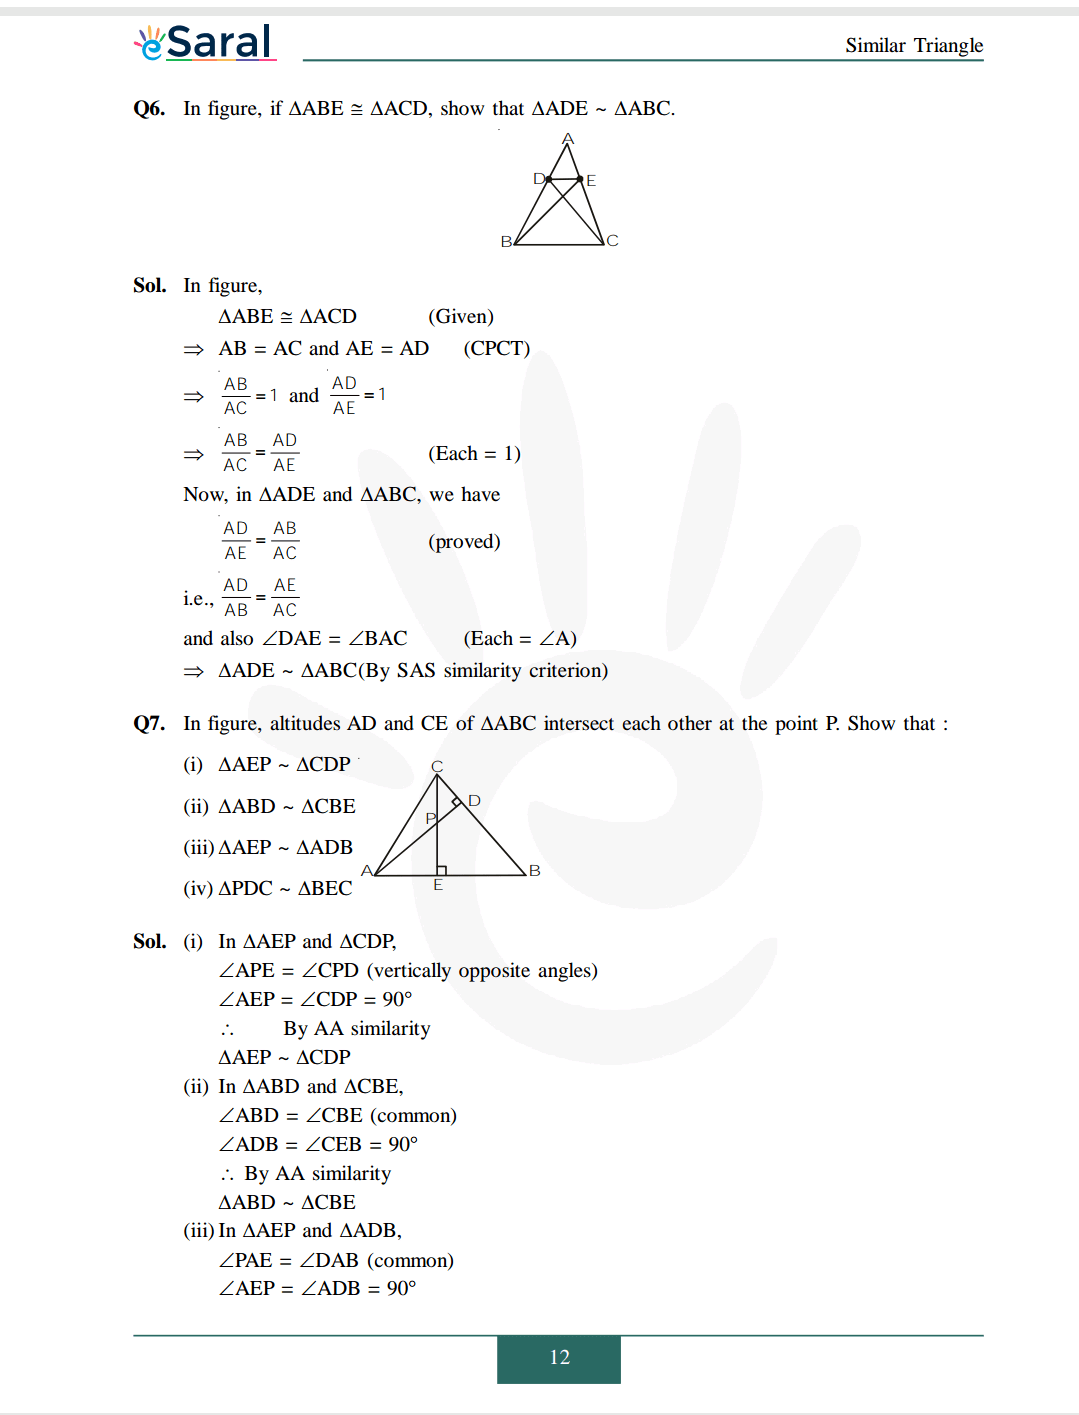 Class 10 Maths Chapter 6 exercise 6.3 solutions Image 5